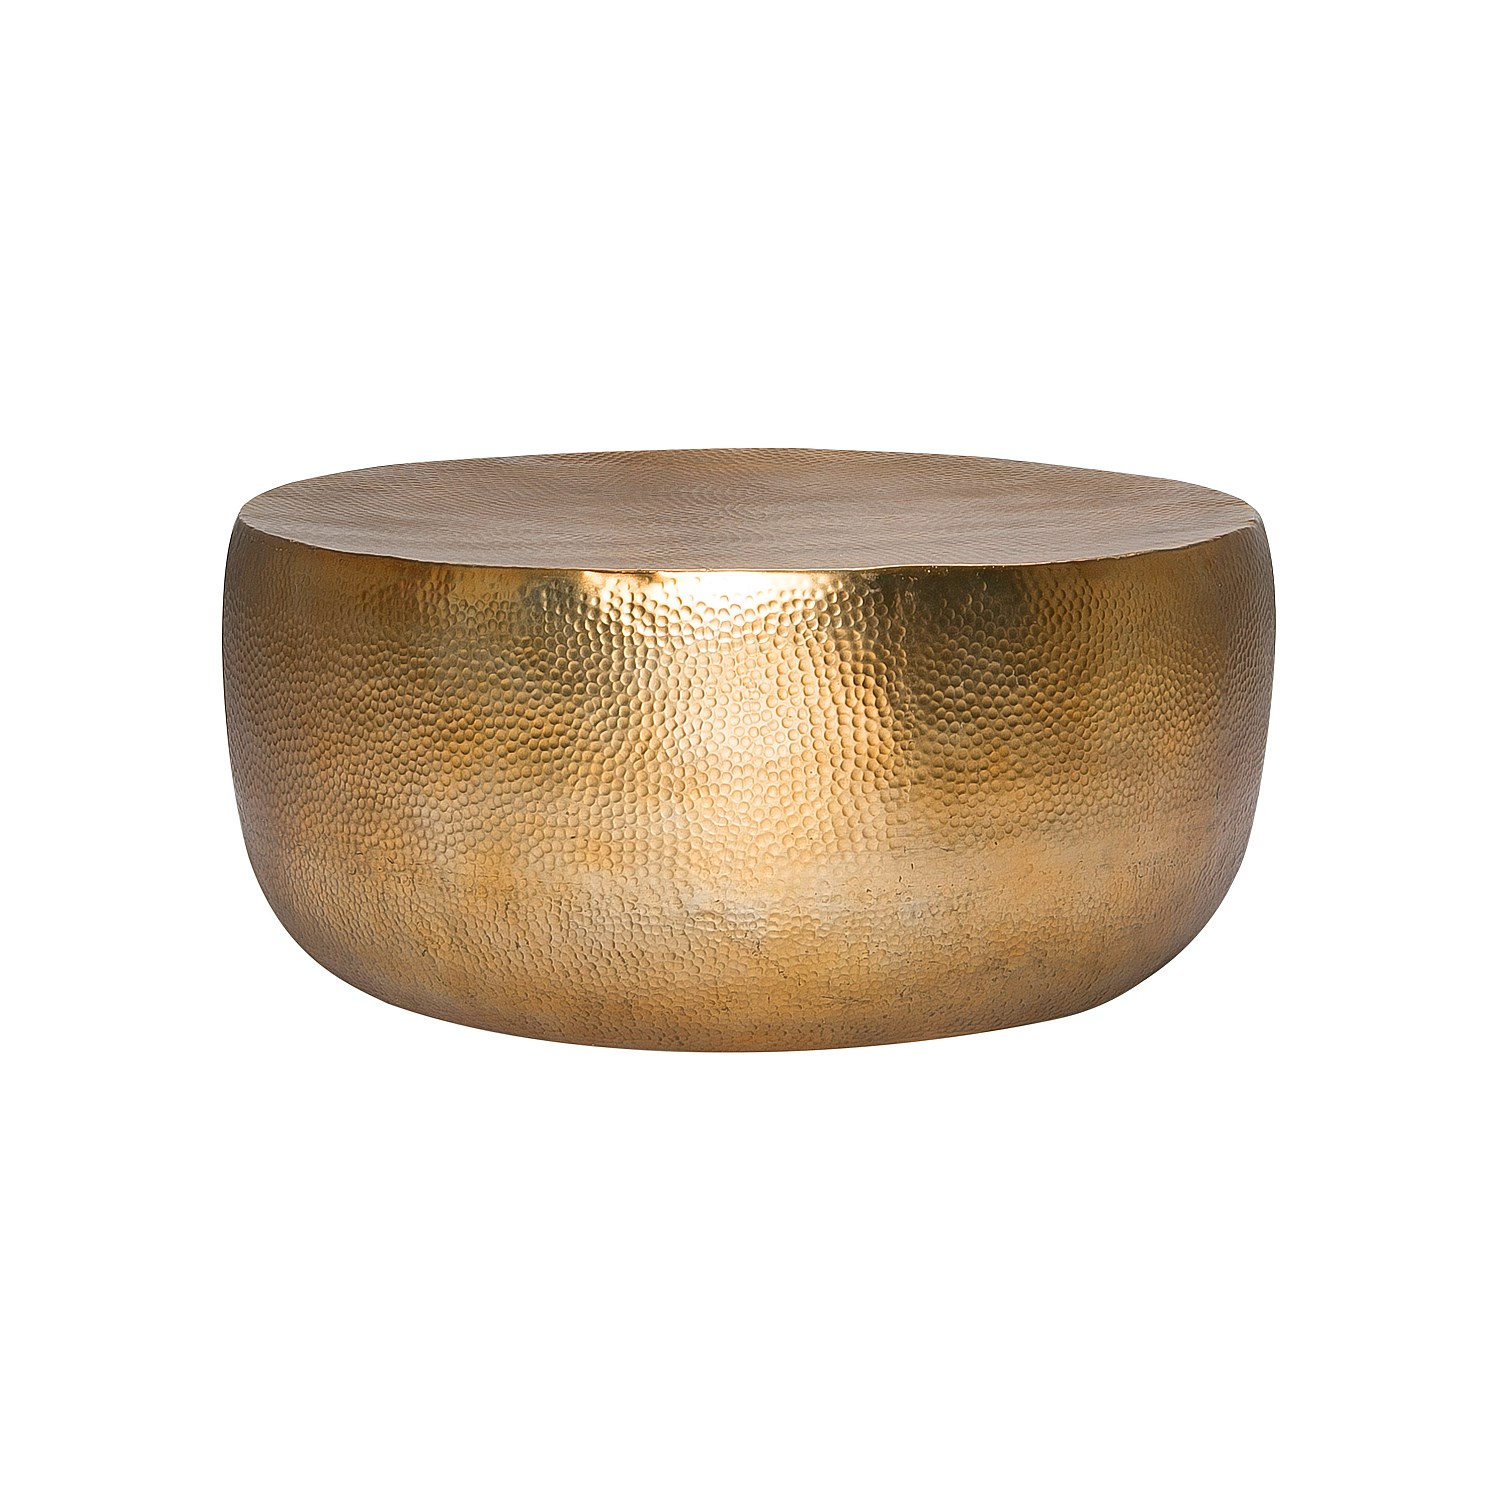 Whats New In Furniture Hammered Drum Coffee Table 95cm in sizing 1500 X 1500